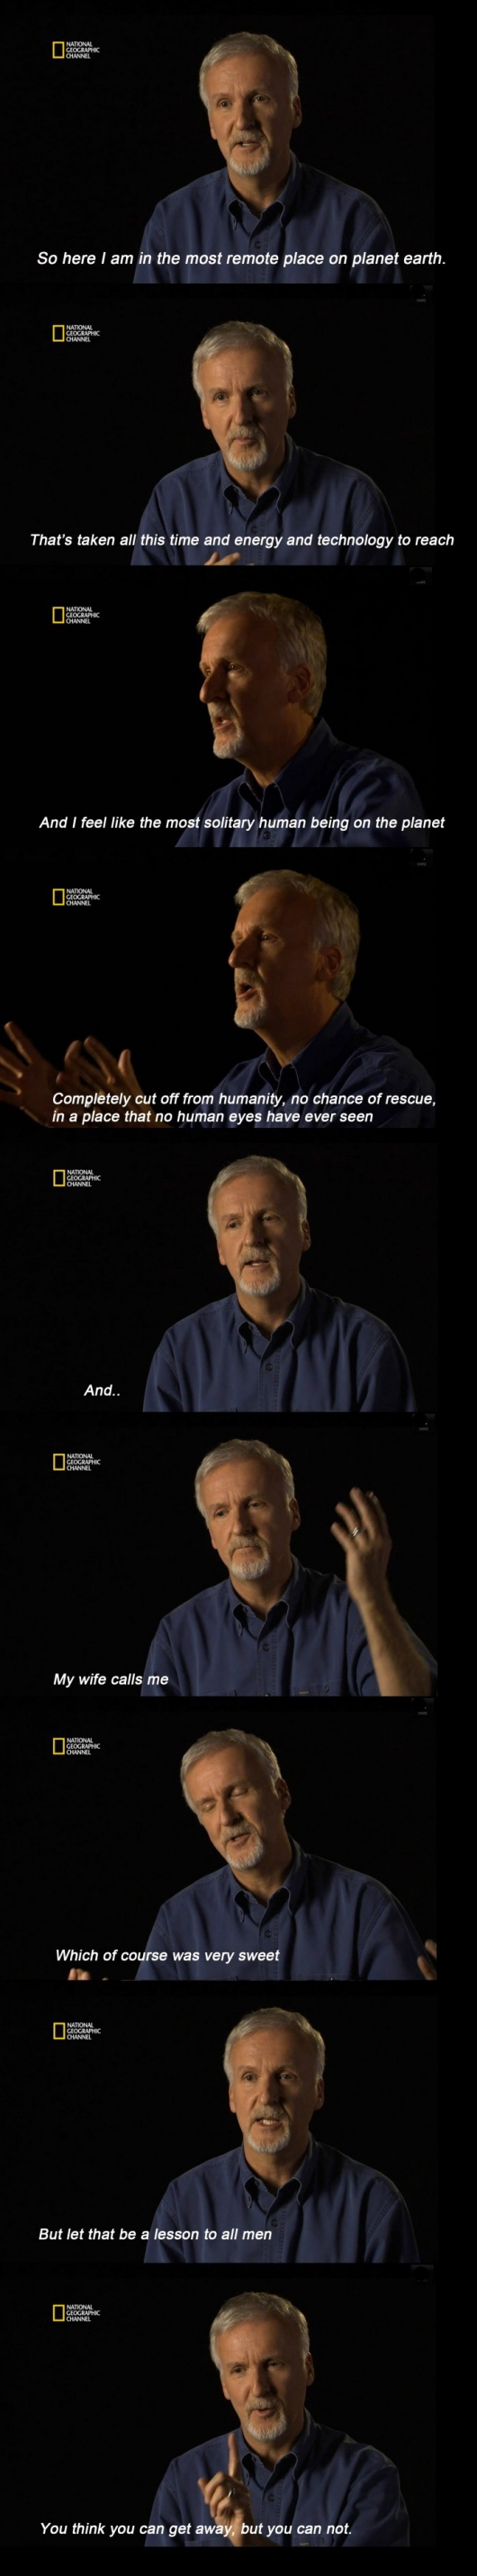 James Cameron - tales from the Mariana Trench